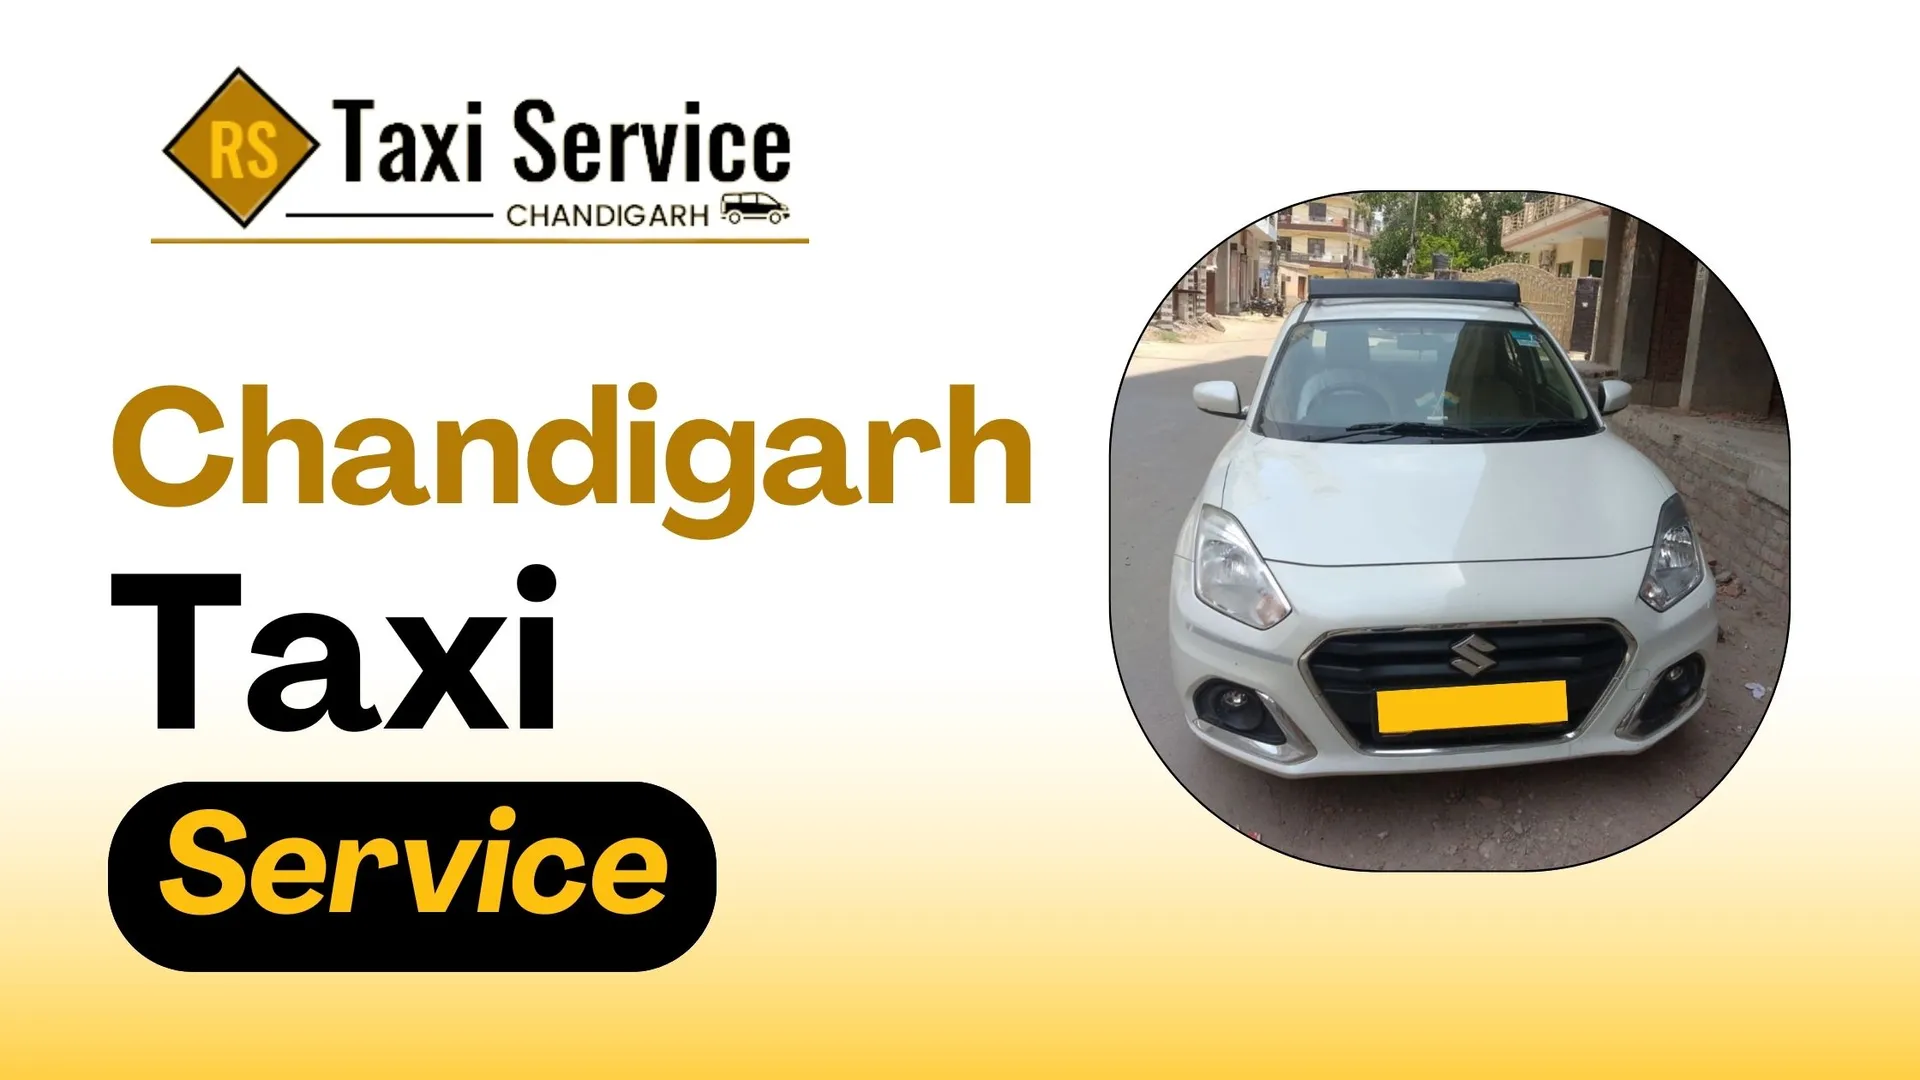 Explore Chandigarh with Convenience — RS Taxi Service offers top-notch Chandigarh taxi service for your seamless travel needs.

Our fleet of well-maintained vehicles and professional drivers ensure a safe and comfortable journey every time. Whether you need airport transfers, local sightseeing, or outstation travel, RS Taxi Service is at your service.

With user-friendly booking and transparent pricing, we prioritize punctuality and customer satisfaction. Trust us to make your travel experience delightful, offering reliable and efficient Chandigarh taxi services. 

Book your ride today and discover the joy of hassle-free transportation with RS Taxi Service. https://www.chandigarhtaxiservice.net/